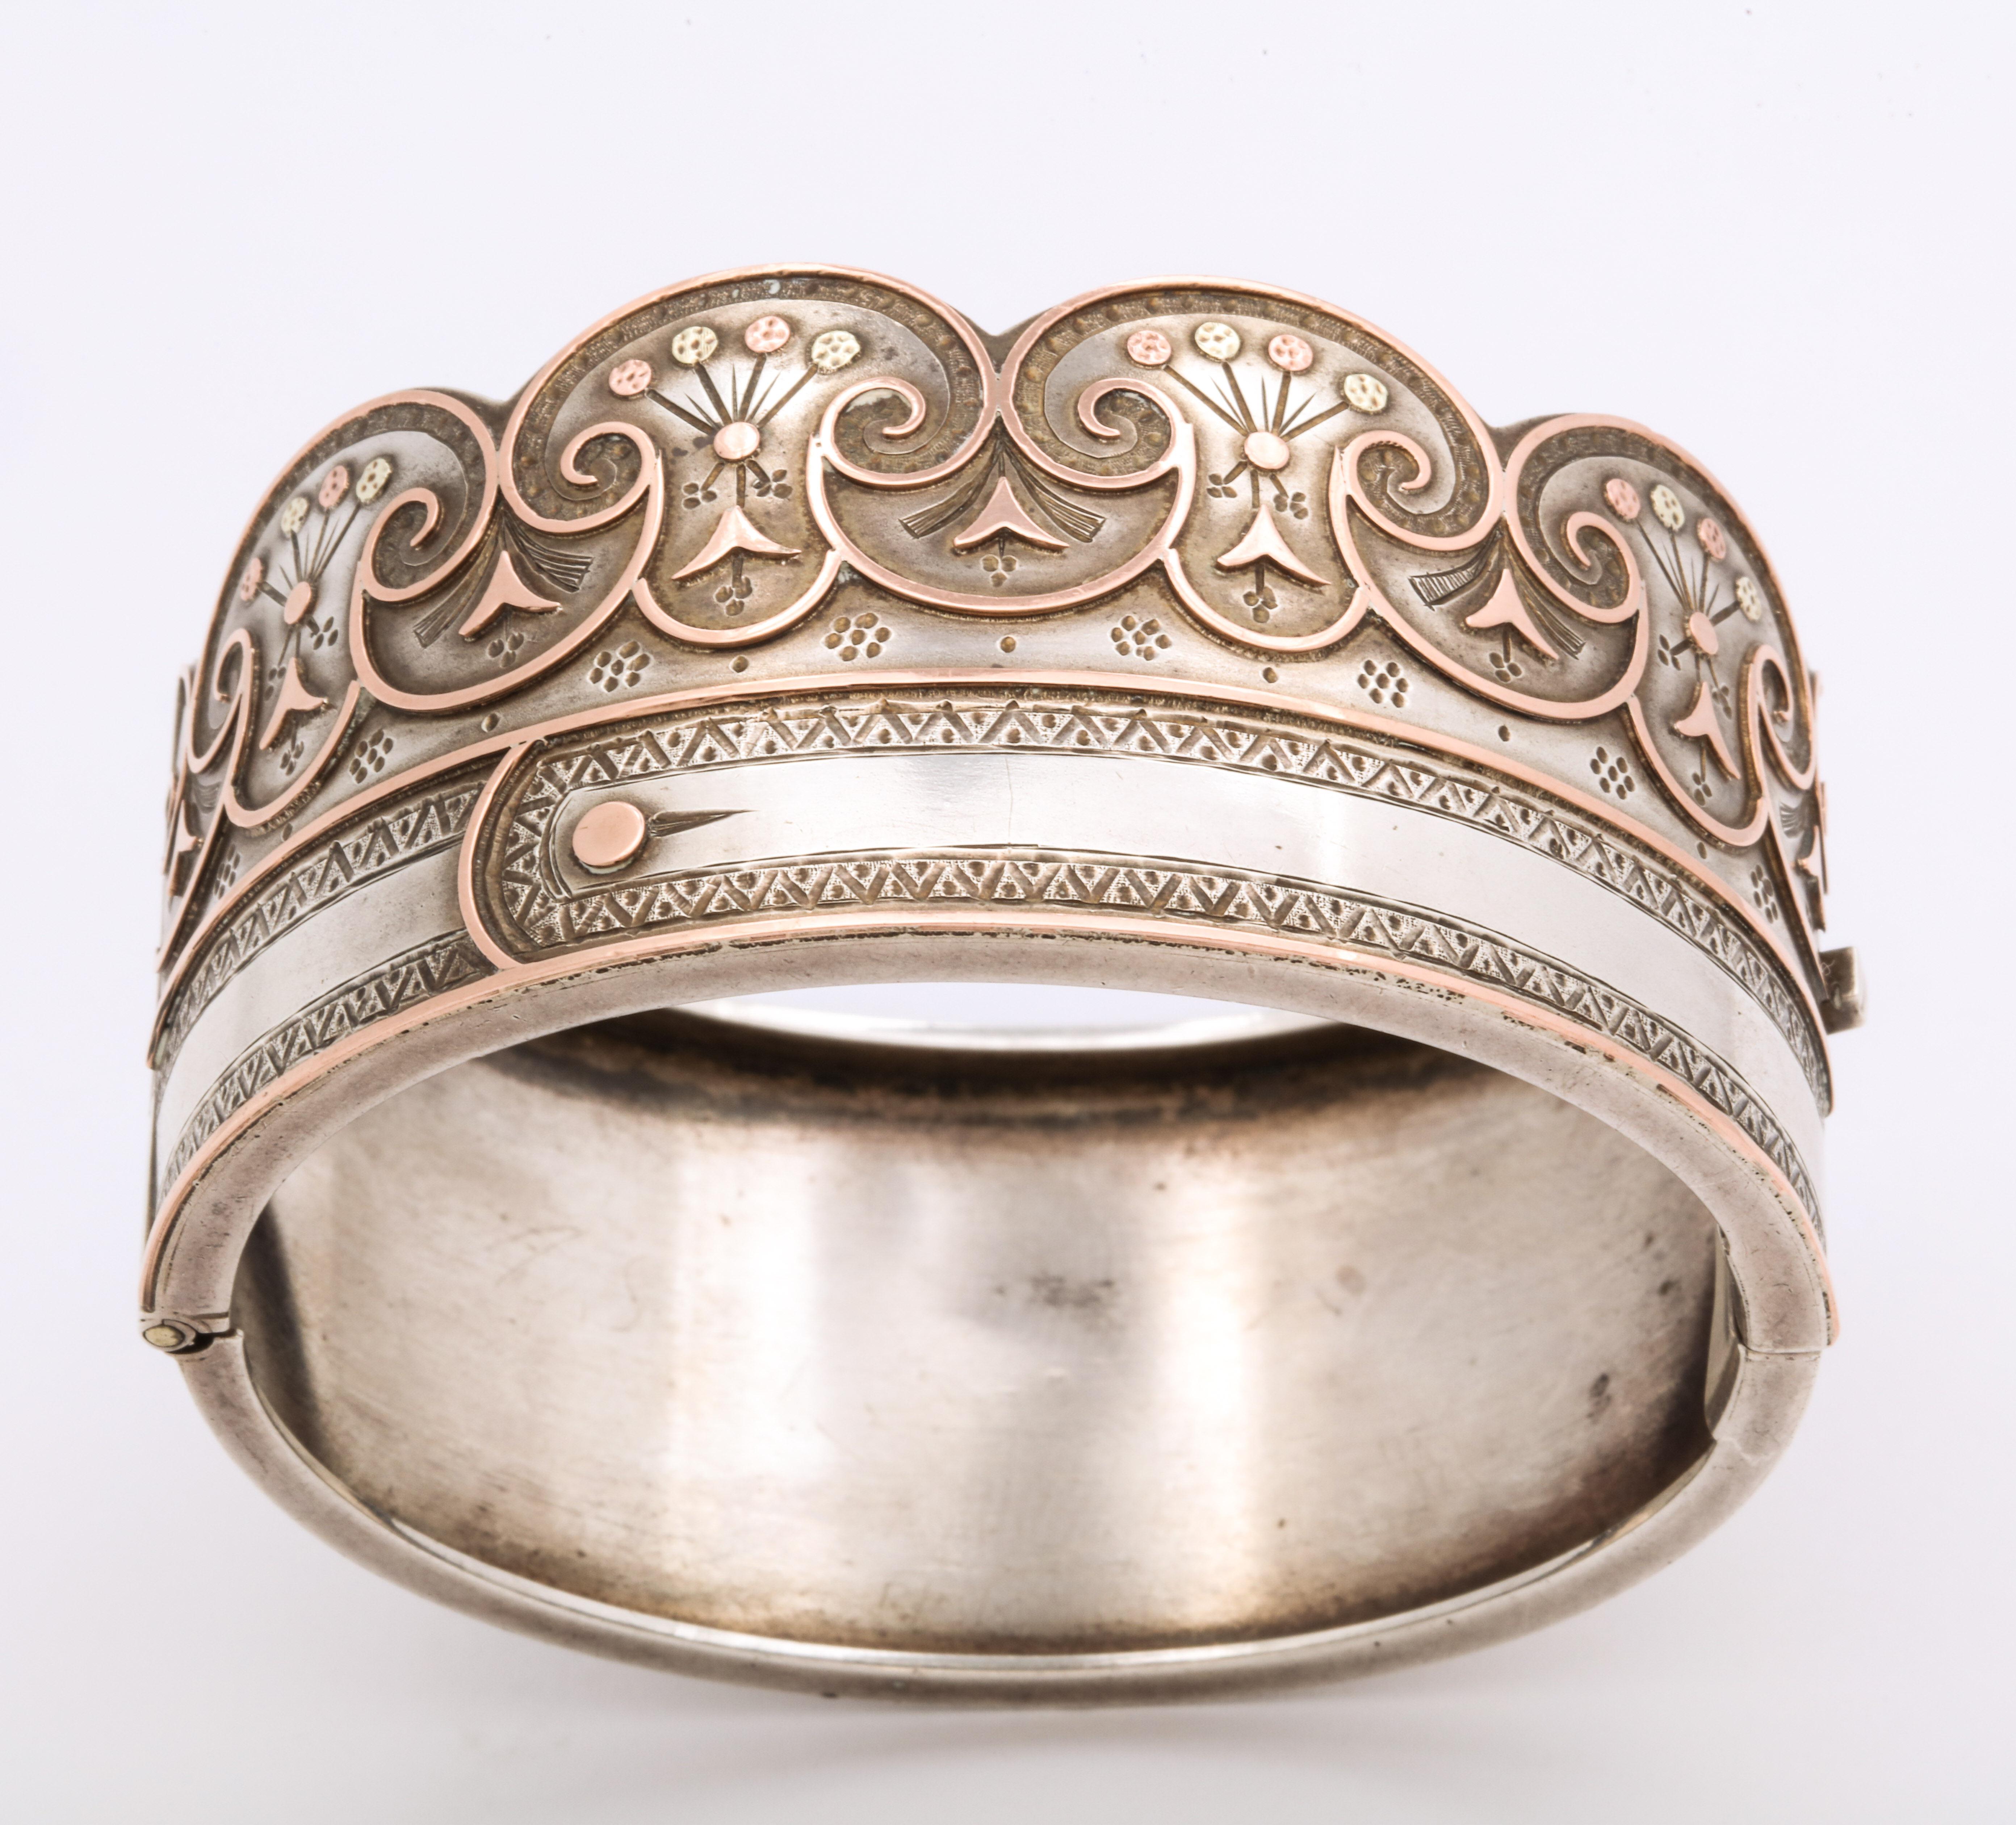  A curvaceous and unique Sterling and Gold Victorian Bracelet with the special meaning of the buttoned cuff that symbolizes joining two to become one e.g. as lovers, as husband and wife, in friendship or even two of the same mind. The scalloped